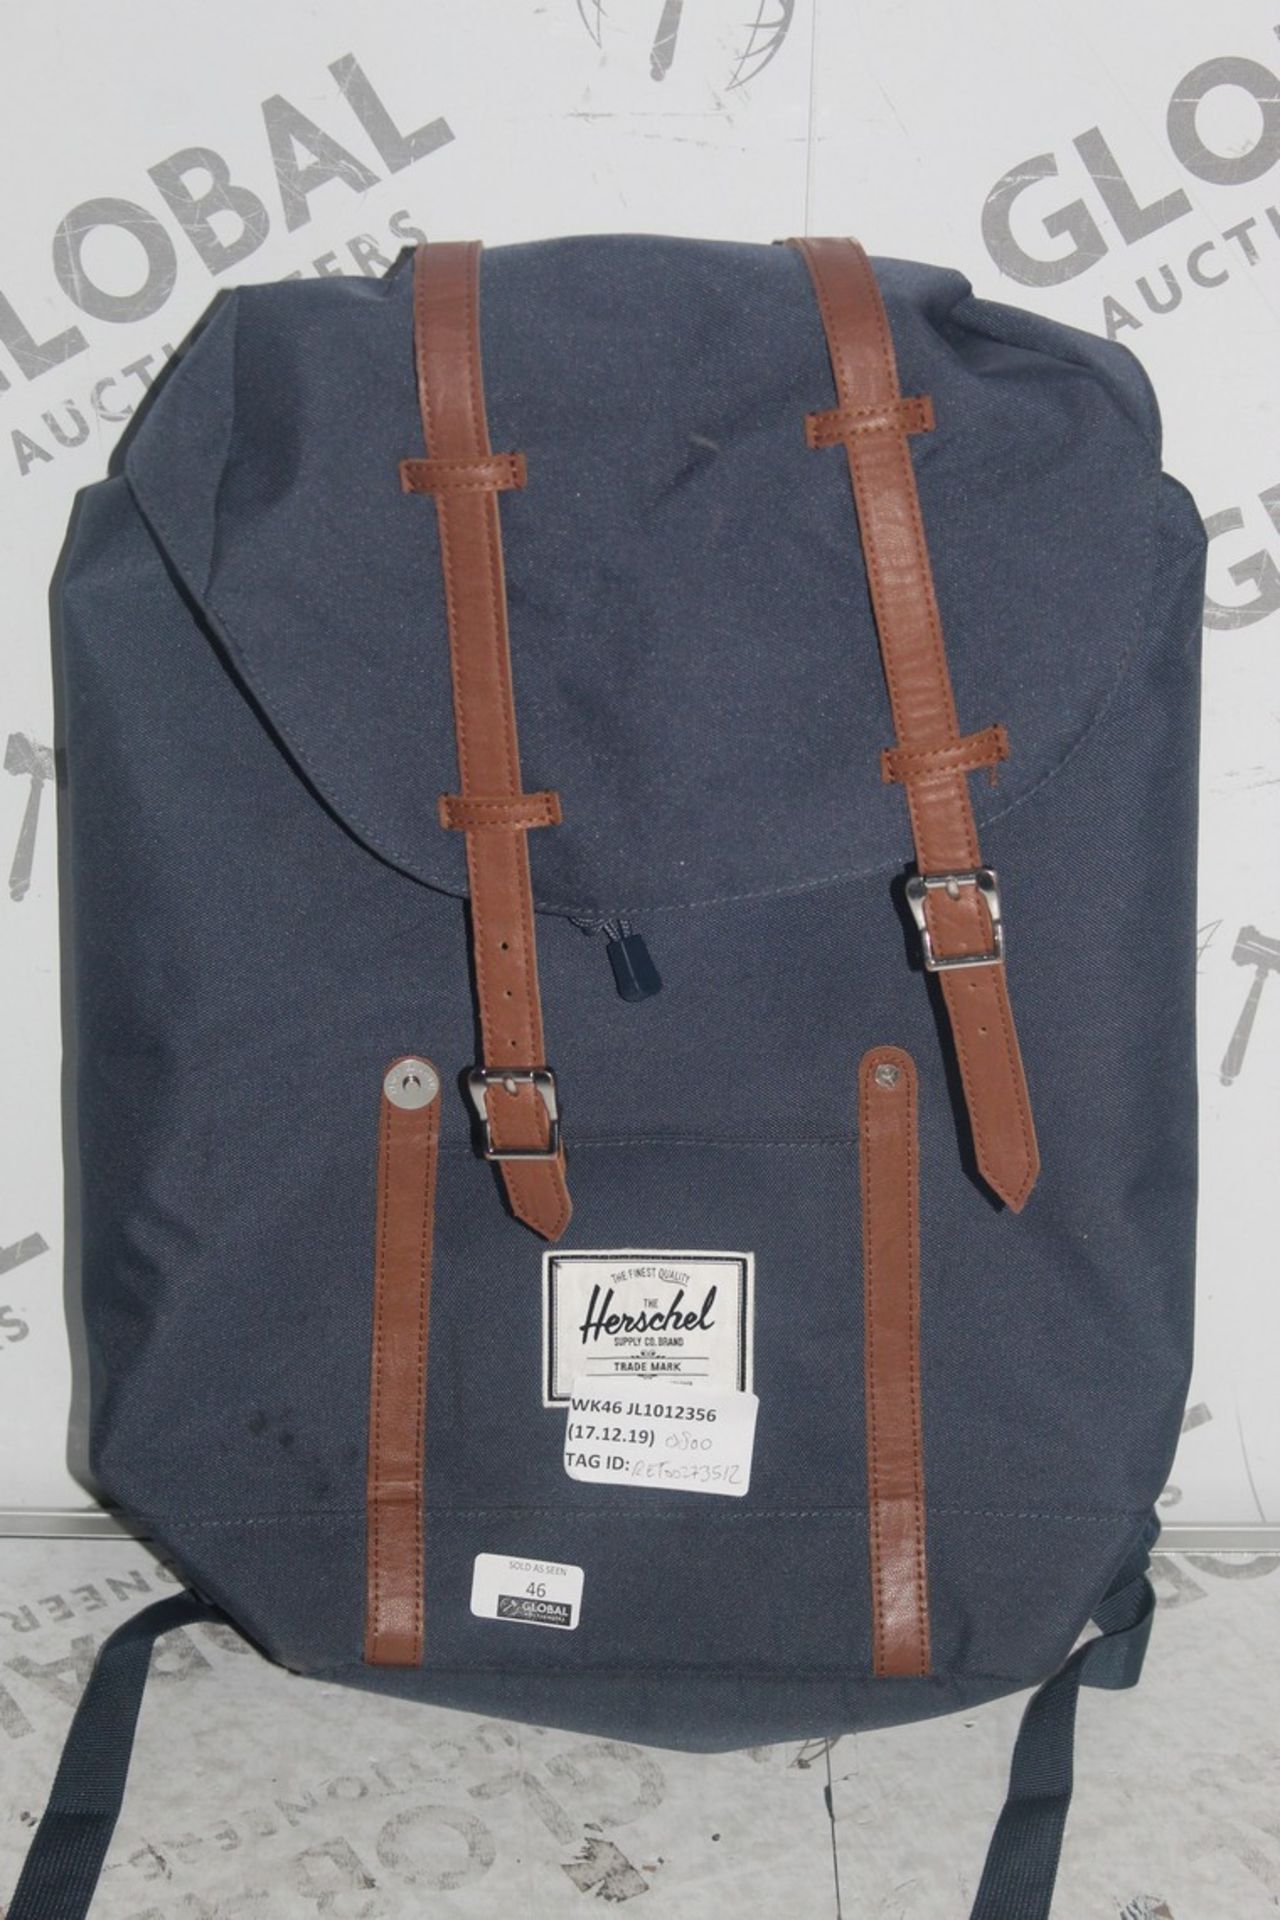 Herschel Navy Blue Backpack RRP £80 (RET00273512) (Public Viewing and Appraisals Available)